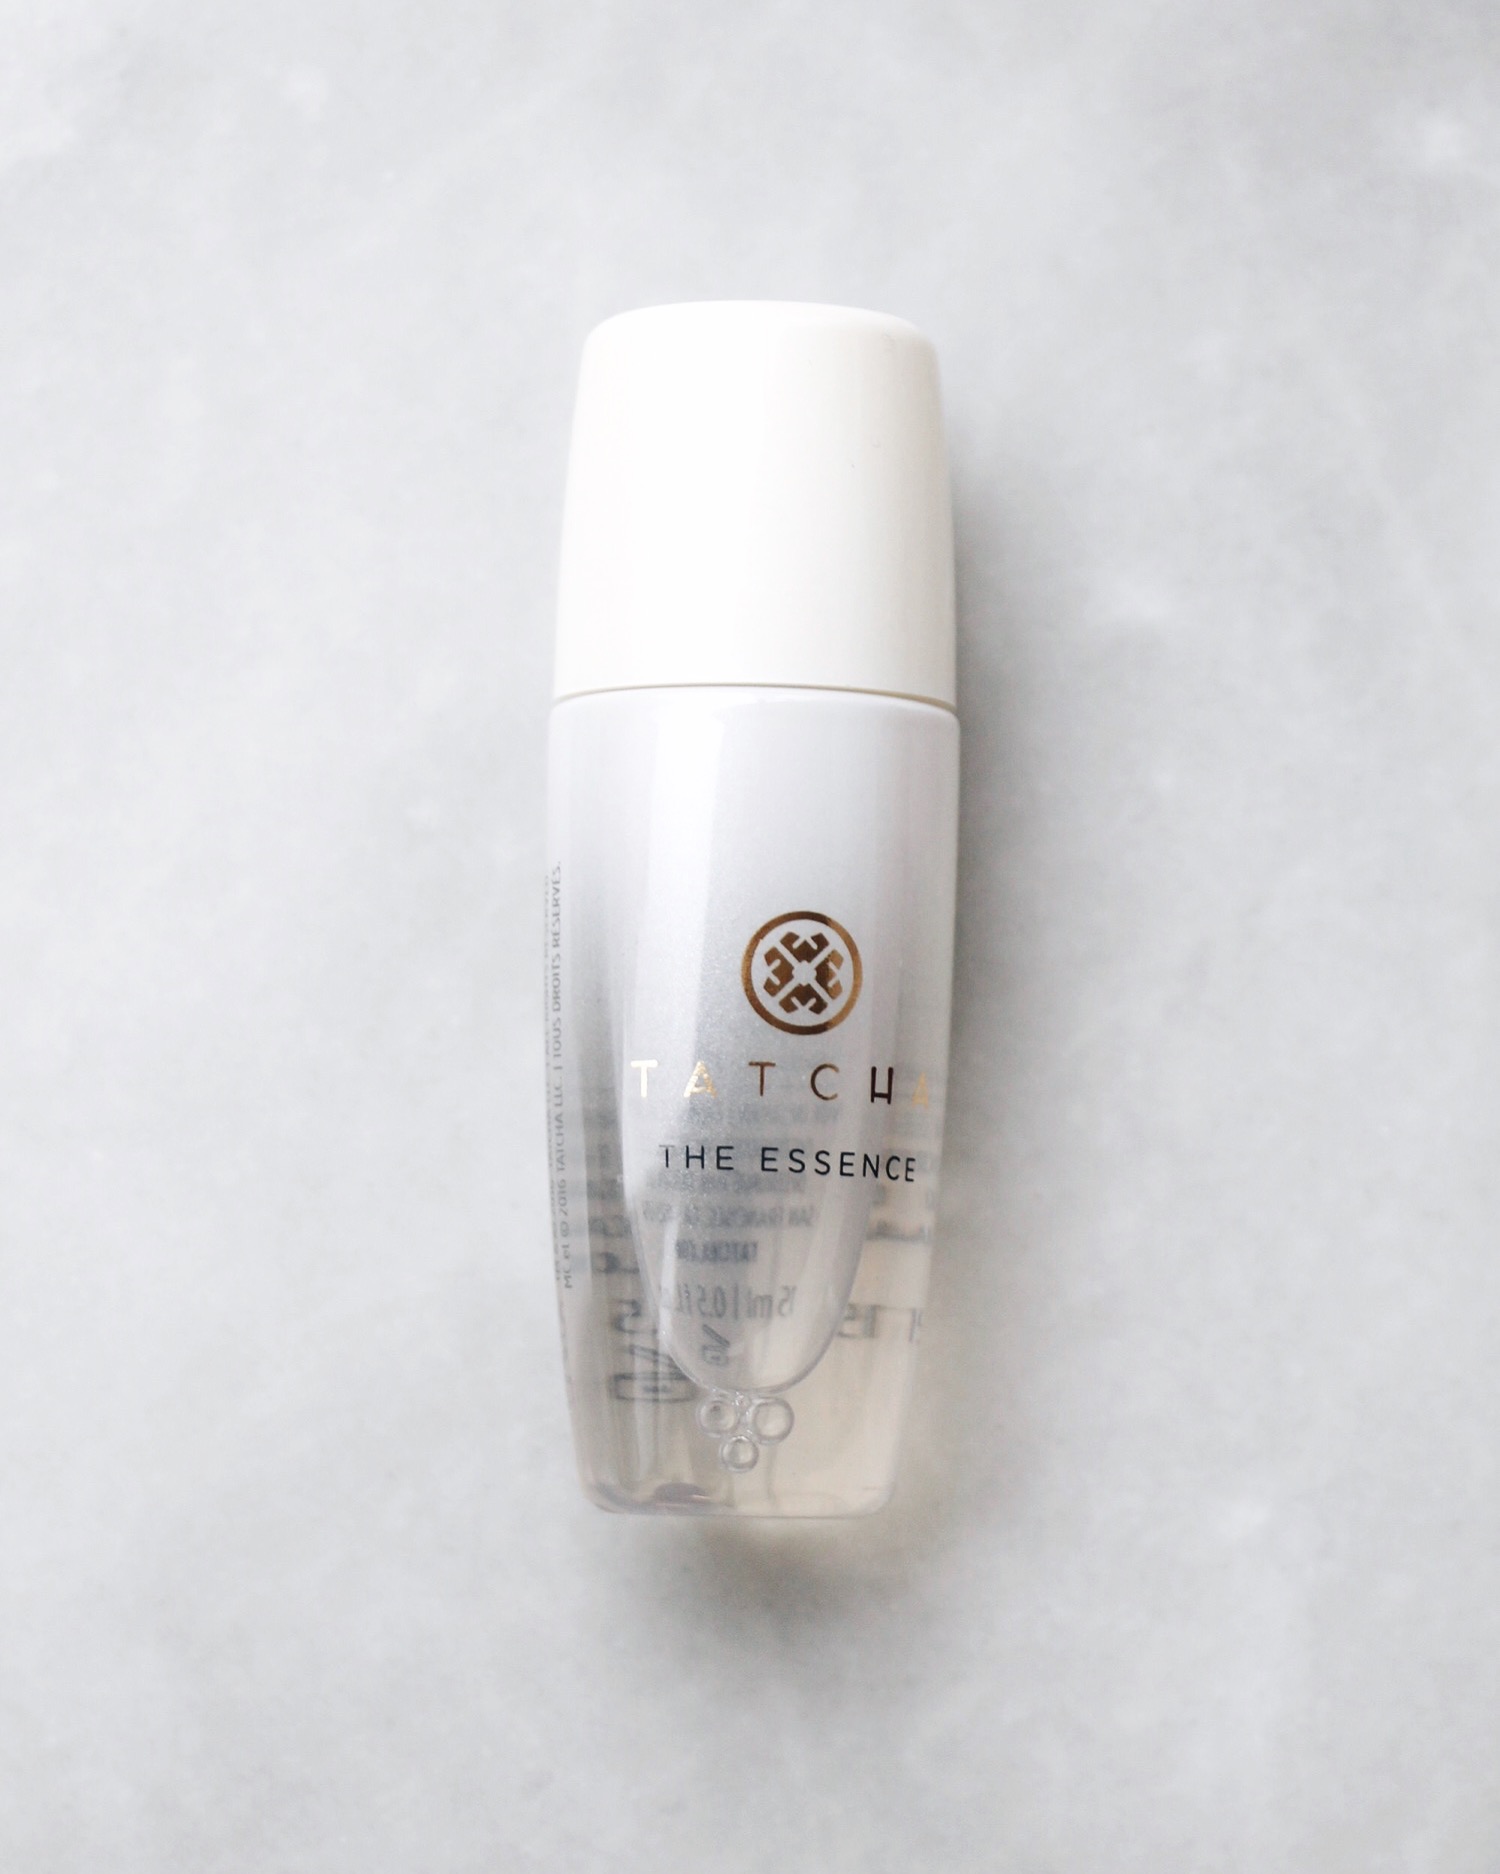 Tatcha The Essence Review: A 7-Second Ritual